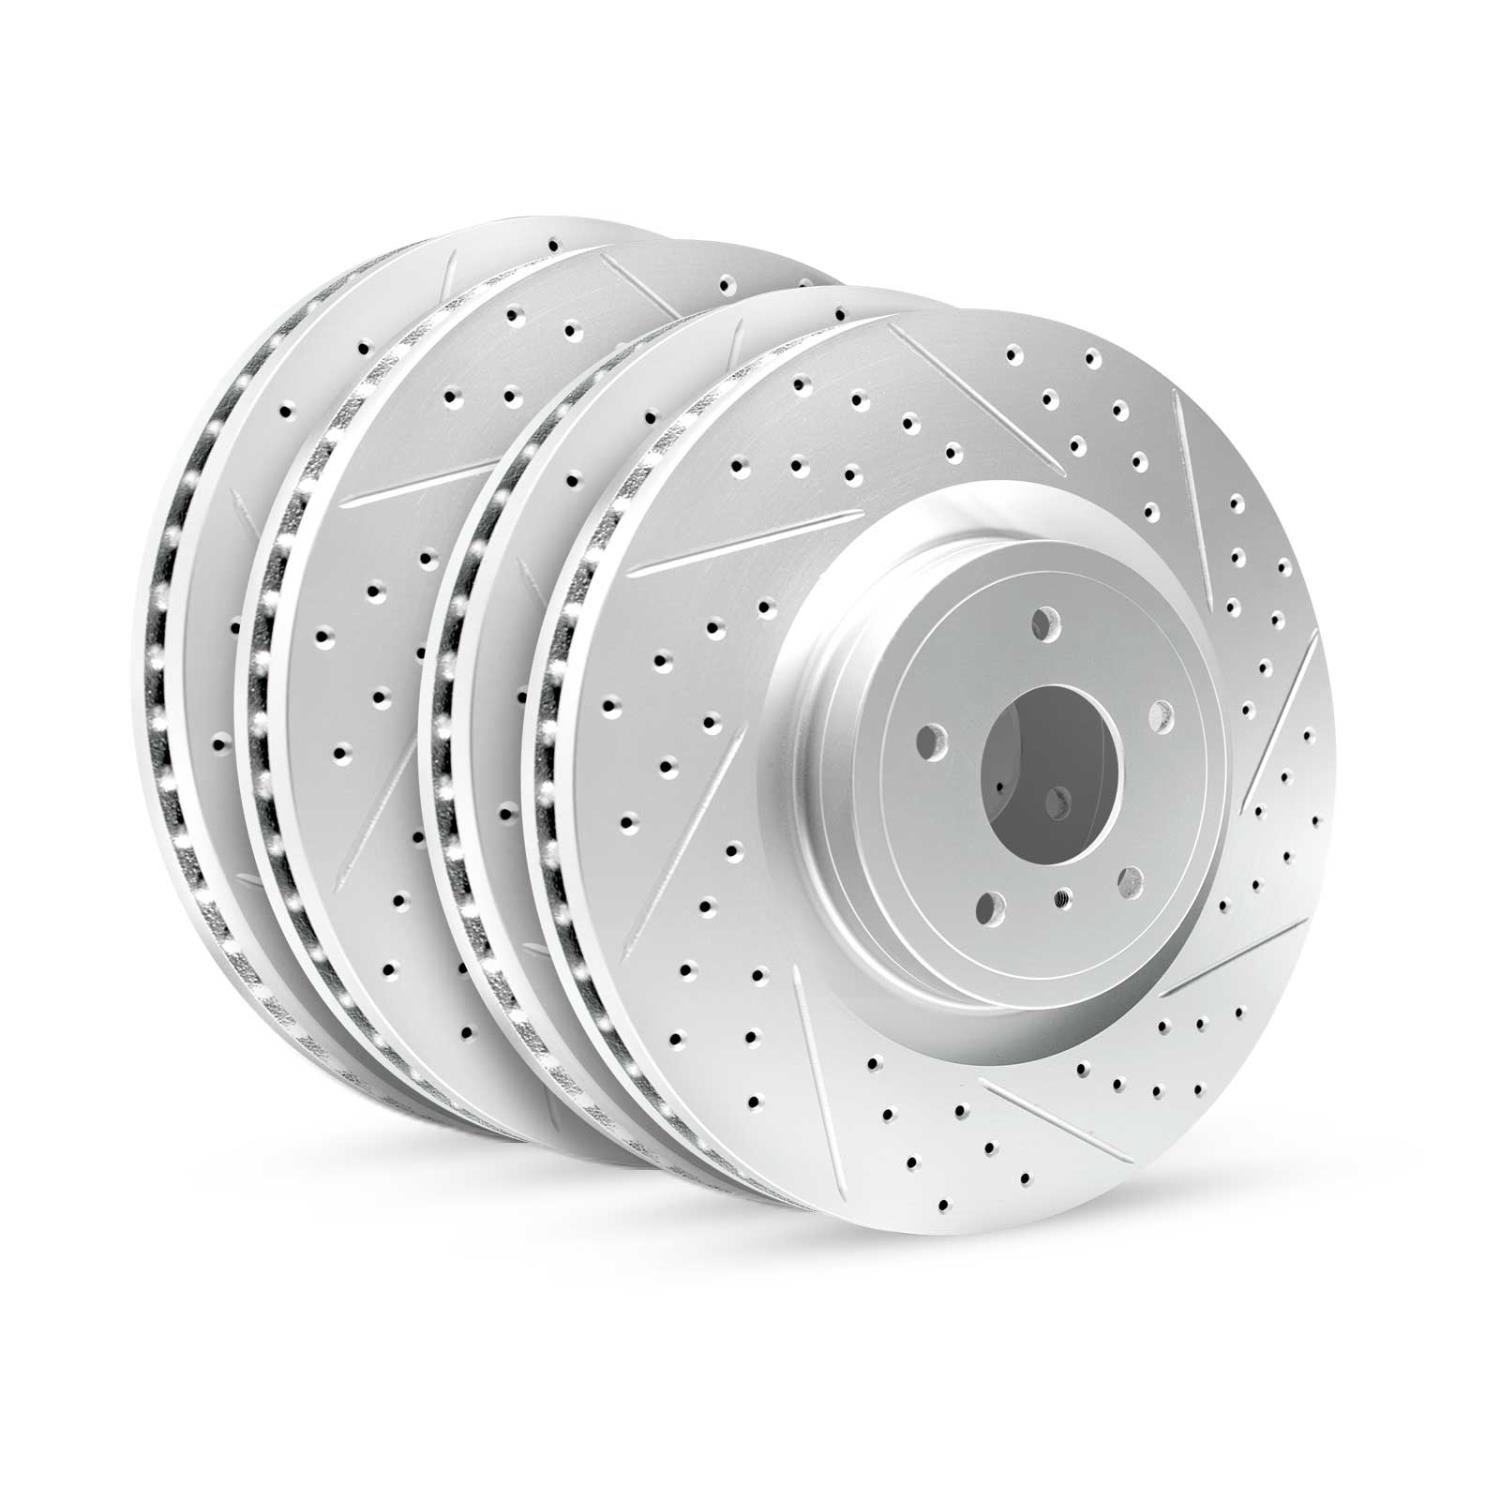 GEO-Carbon Drilled/Slotted Rotors, 1989-1996 Infiniti/Nissan, Position: Front/Rear